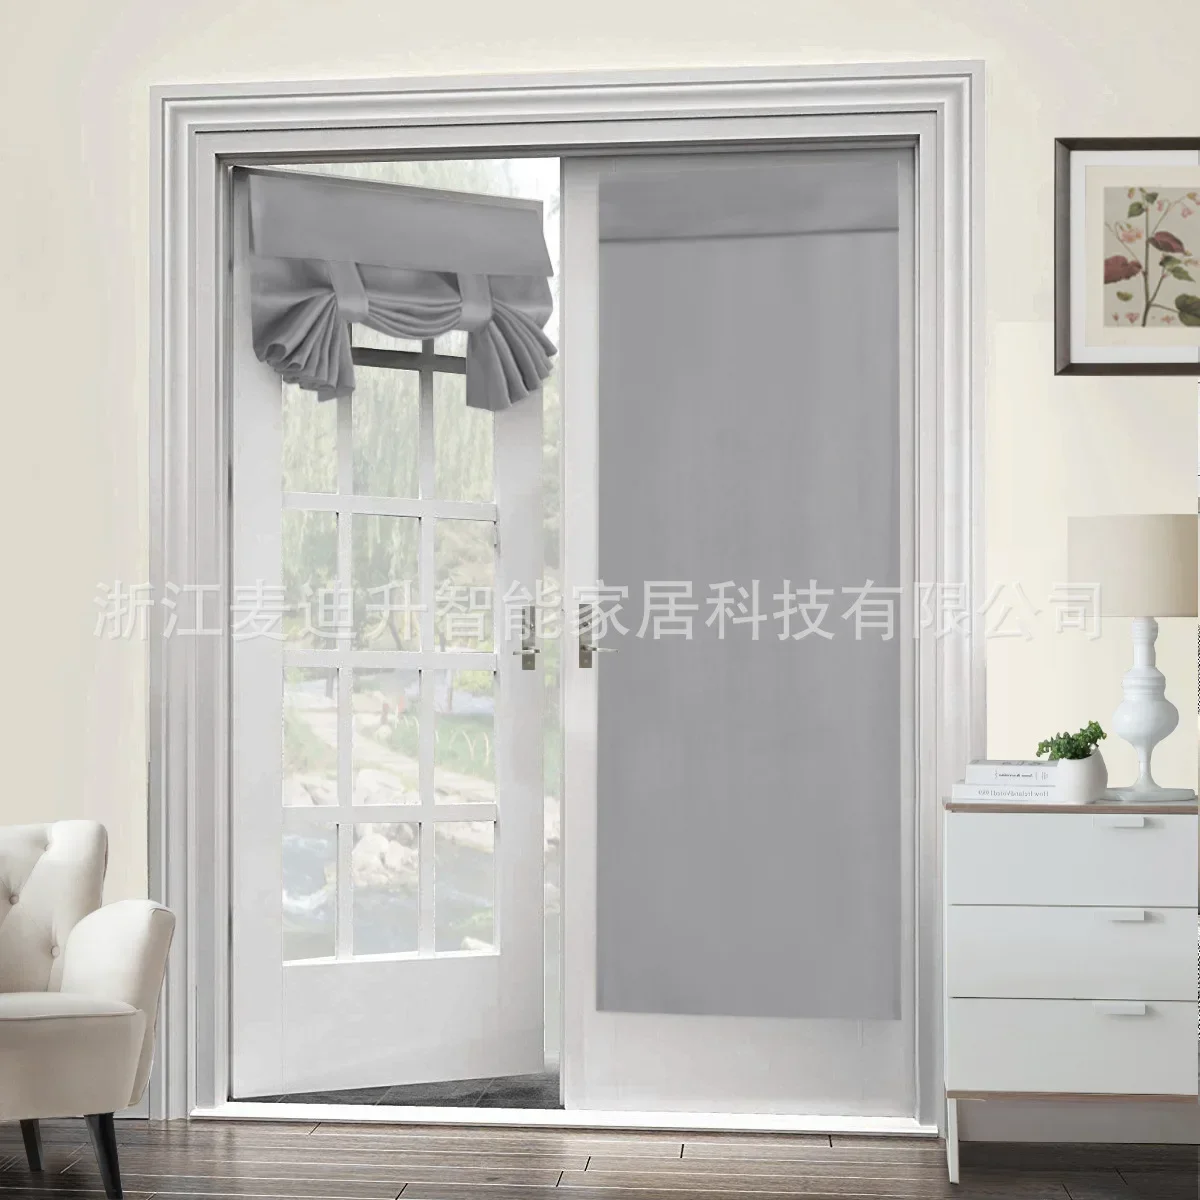 

20377- XZ-Precision Curtains for Bedroom Villa Window Curtain for Living Room Embroidered Gauze Curtains 3D